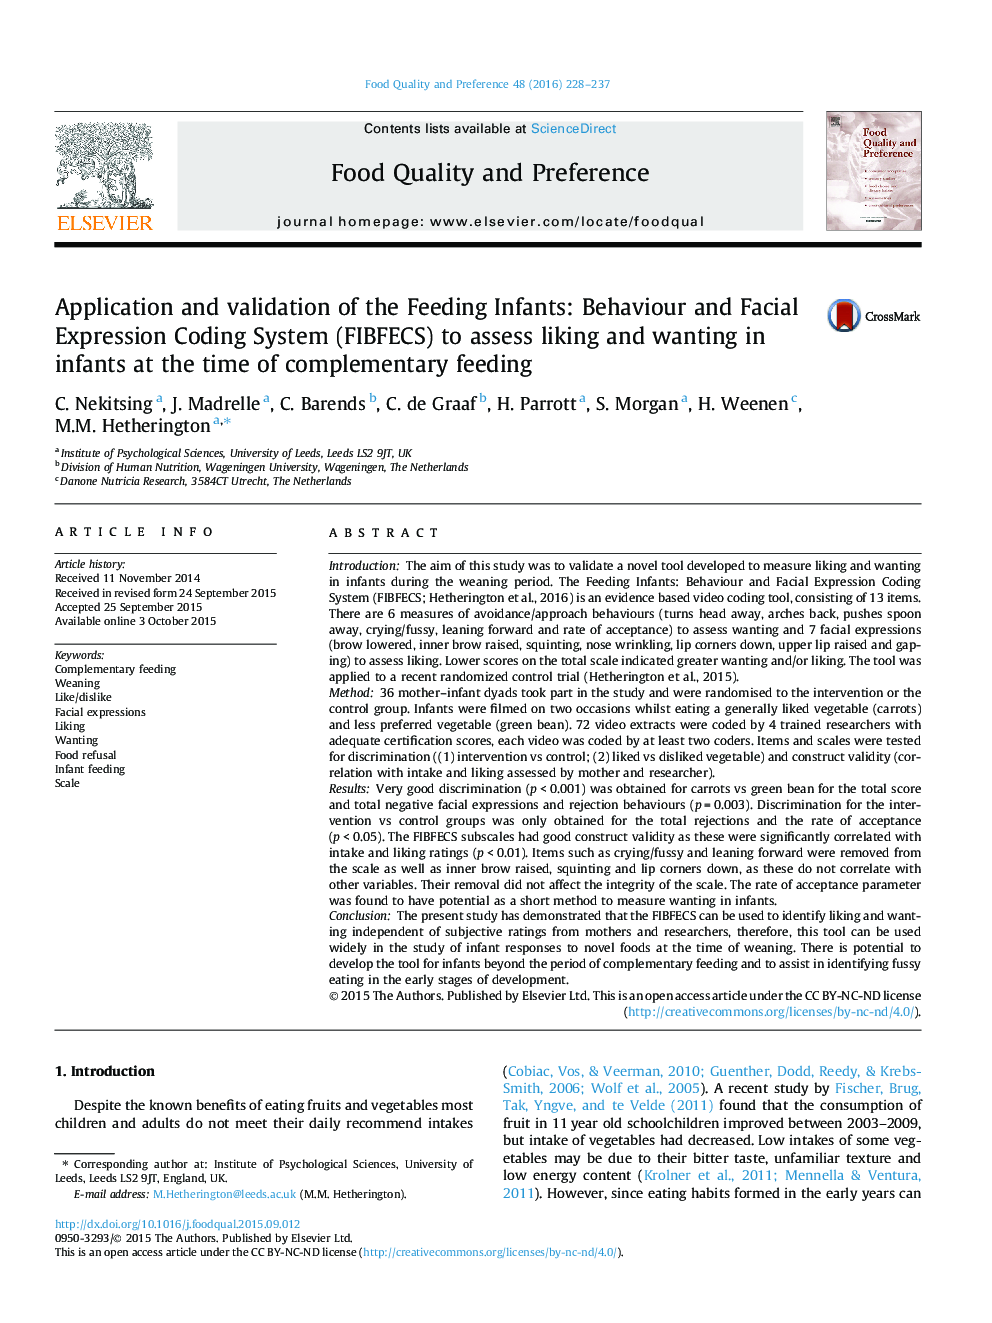 Application and validation of the Feeding Infants: Behaviour and Facial Expression Coding System (FIBFECS) to assess liking and wanting in infants at the time of complementary feeding